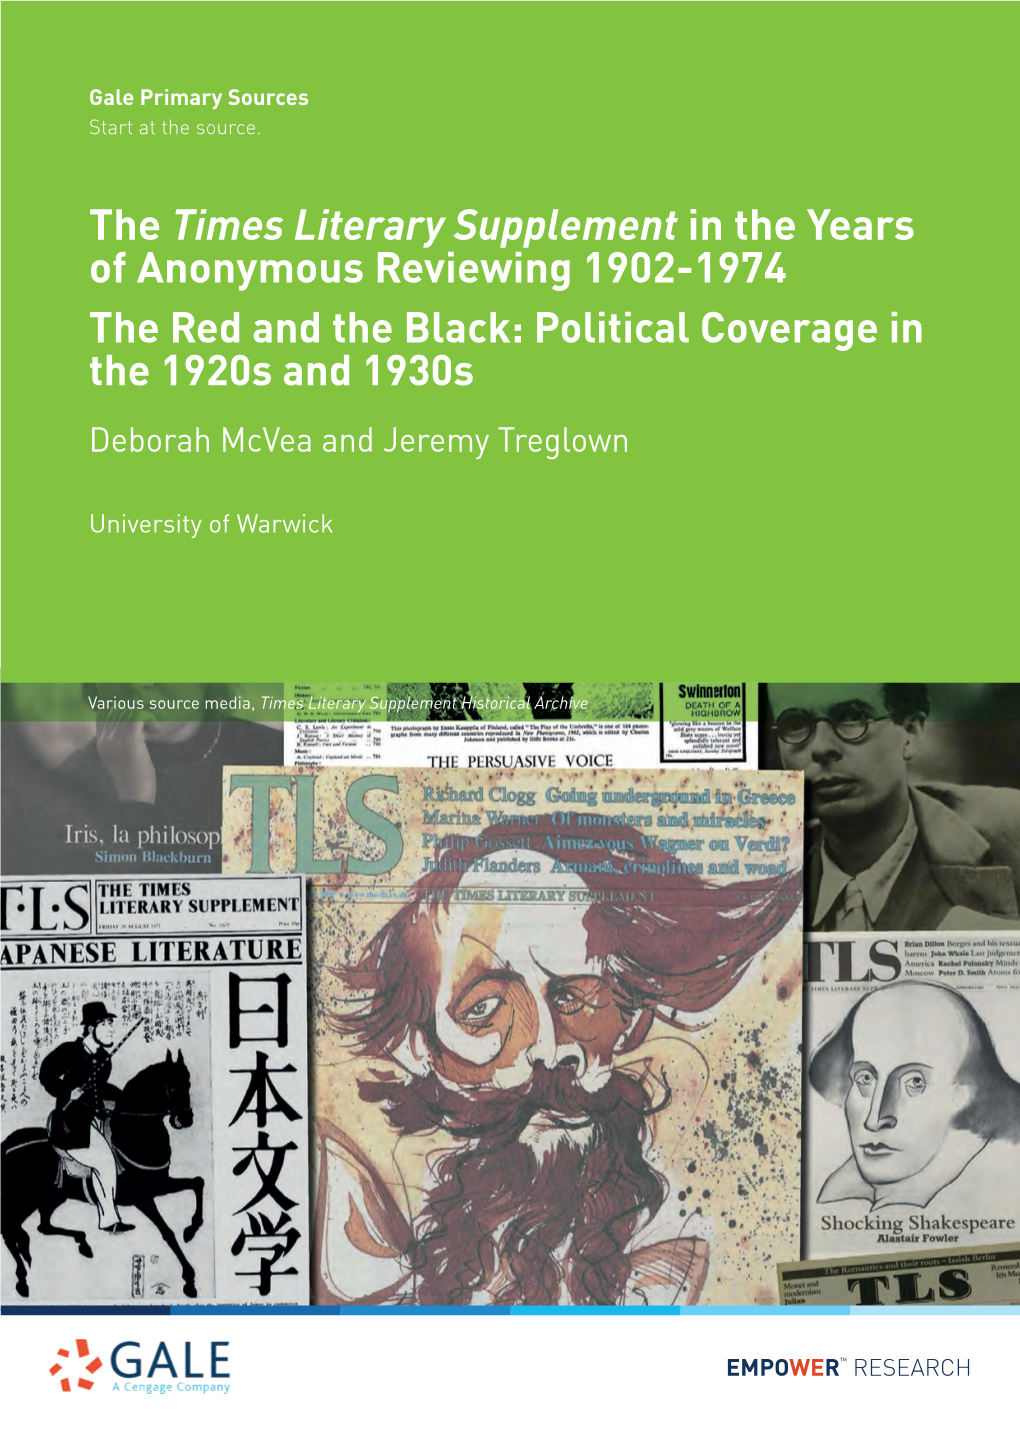 The Times Literary Supplement in the Years of Anonymous Reviewing